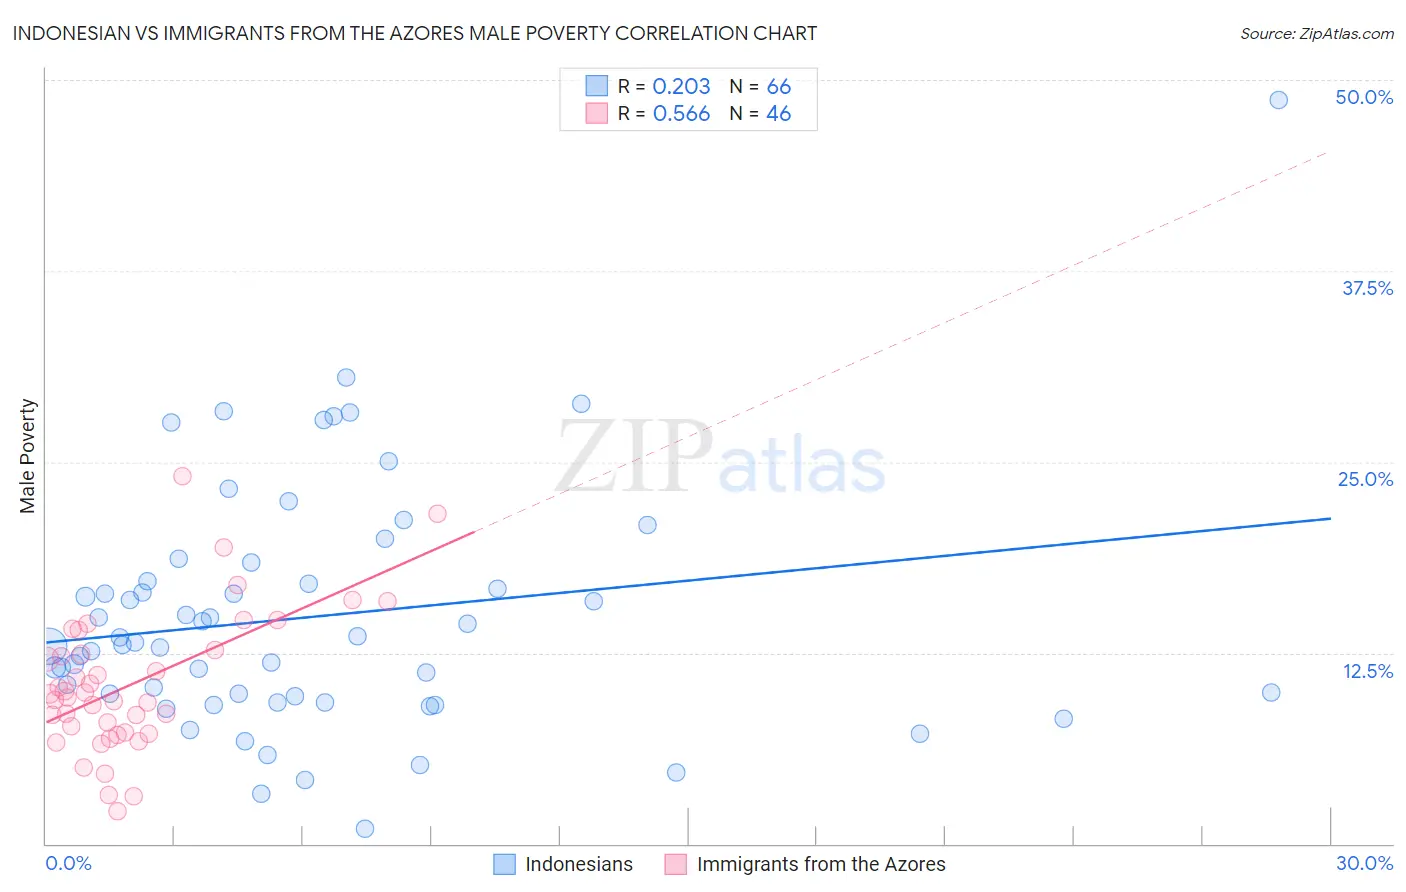 Indonesian vs Immigrants from the Azores Male Poverty